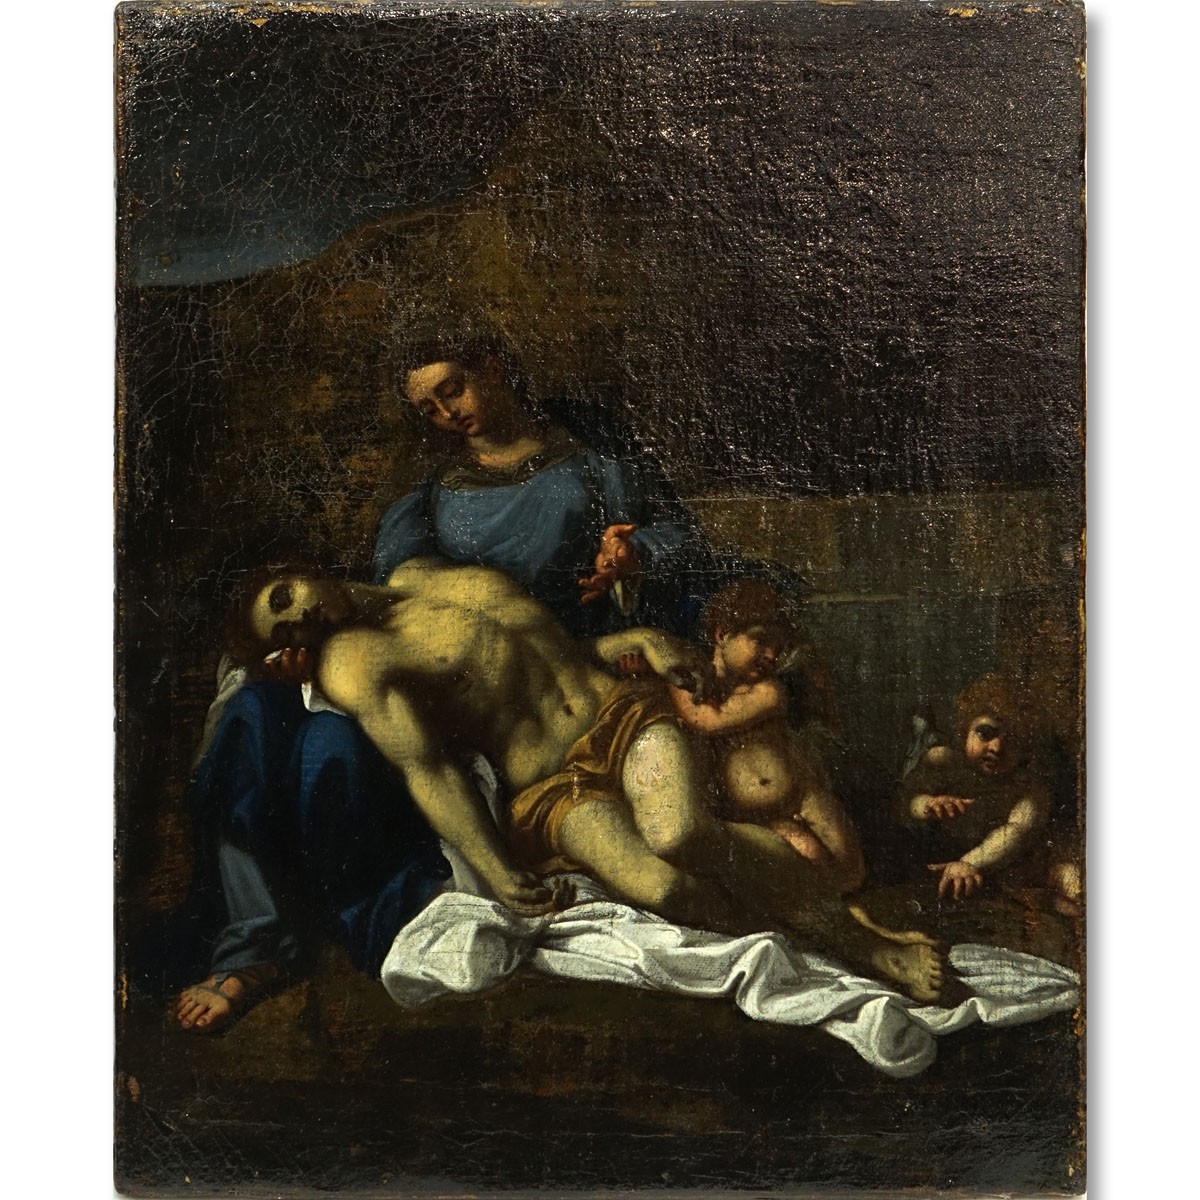 Attributed to: Annibale Carracci, Italian (1560 - 1609) Oil on Canvas "Pieta", label inscribed 'Hanibal Carracci' en verso. Conserved condition, varnish throughout, darkening, paint loss and in-painting.